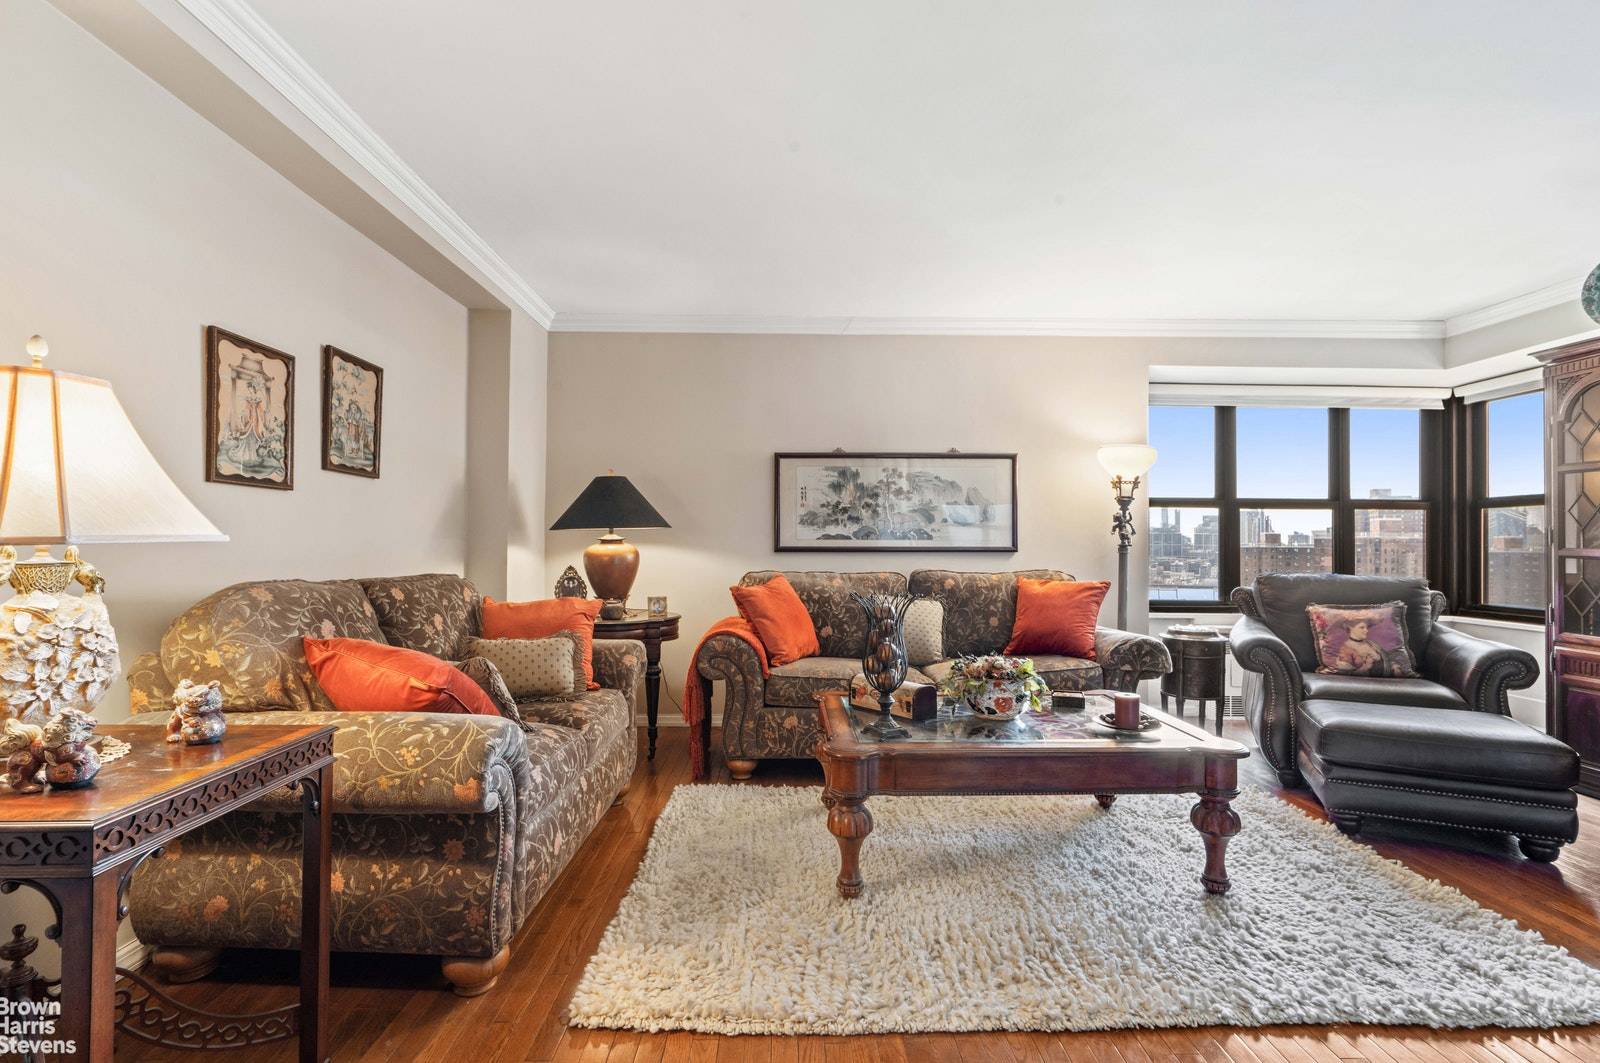 SUNDAY OPEN HOUSES ARE BY APPOINTMENT AND SLOTS MUST BE BOOKED IN ADVANCELargest 2BR layout in Seward on high floor with East River and City views !